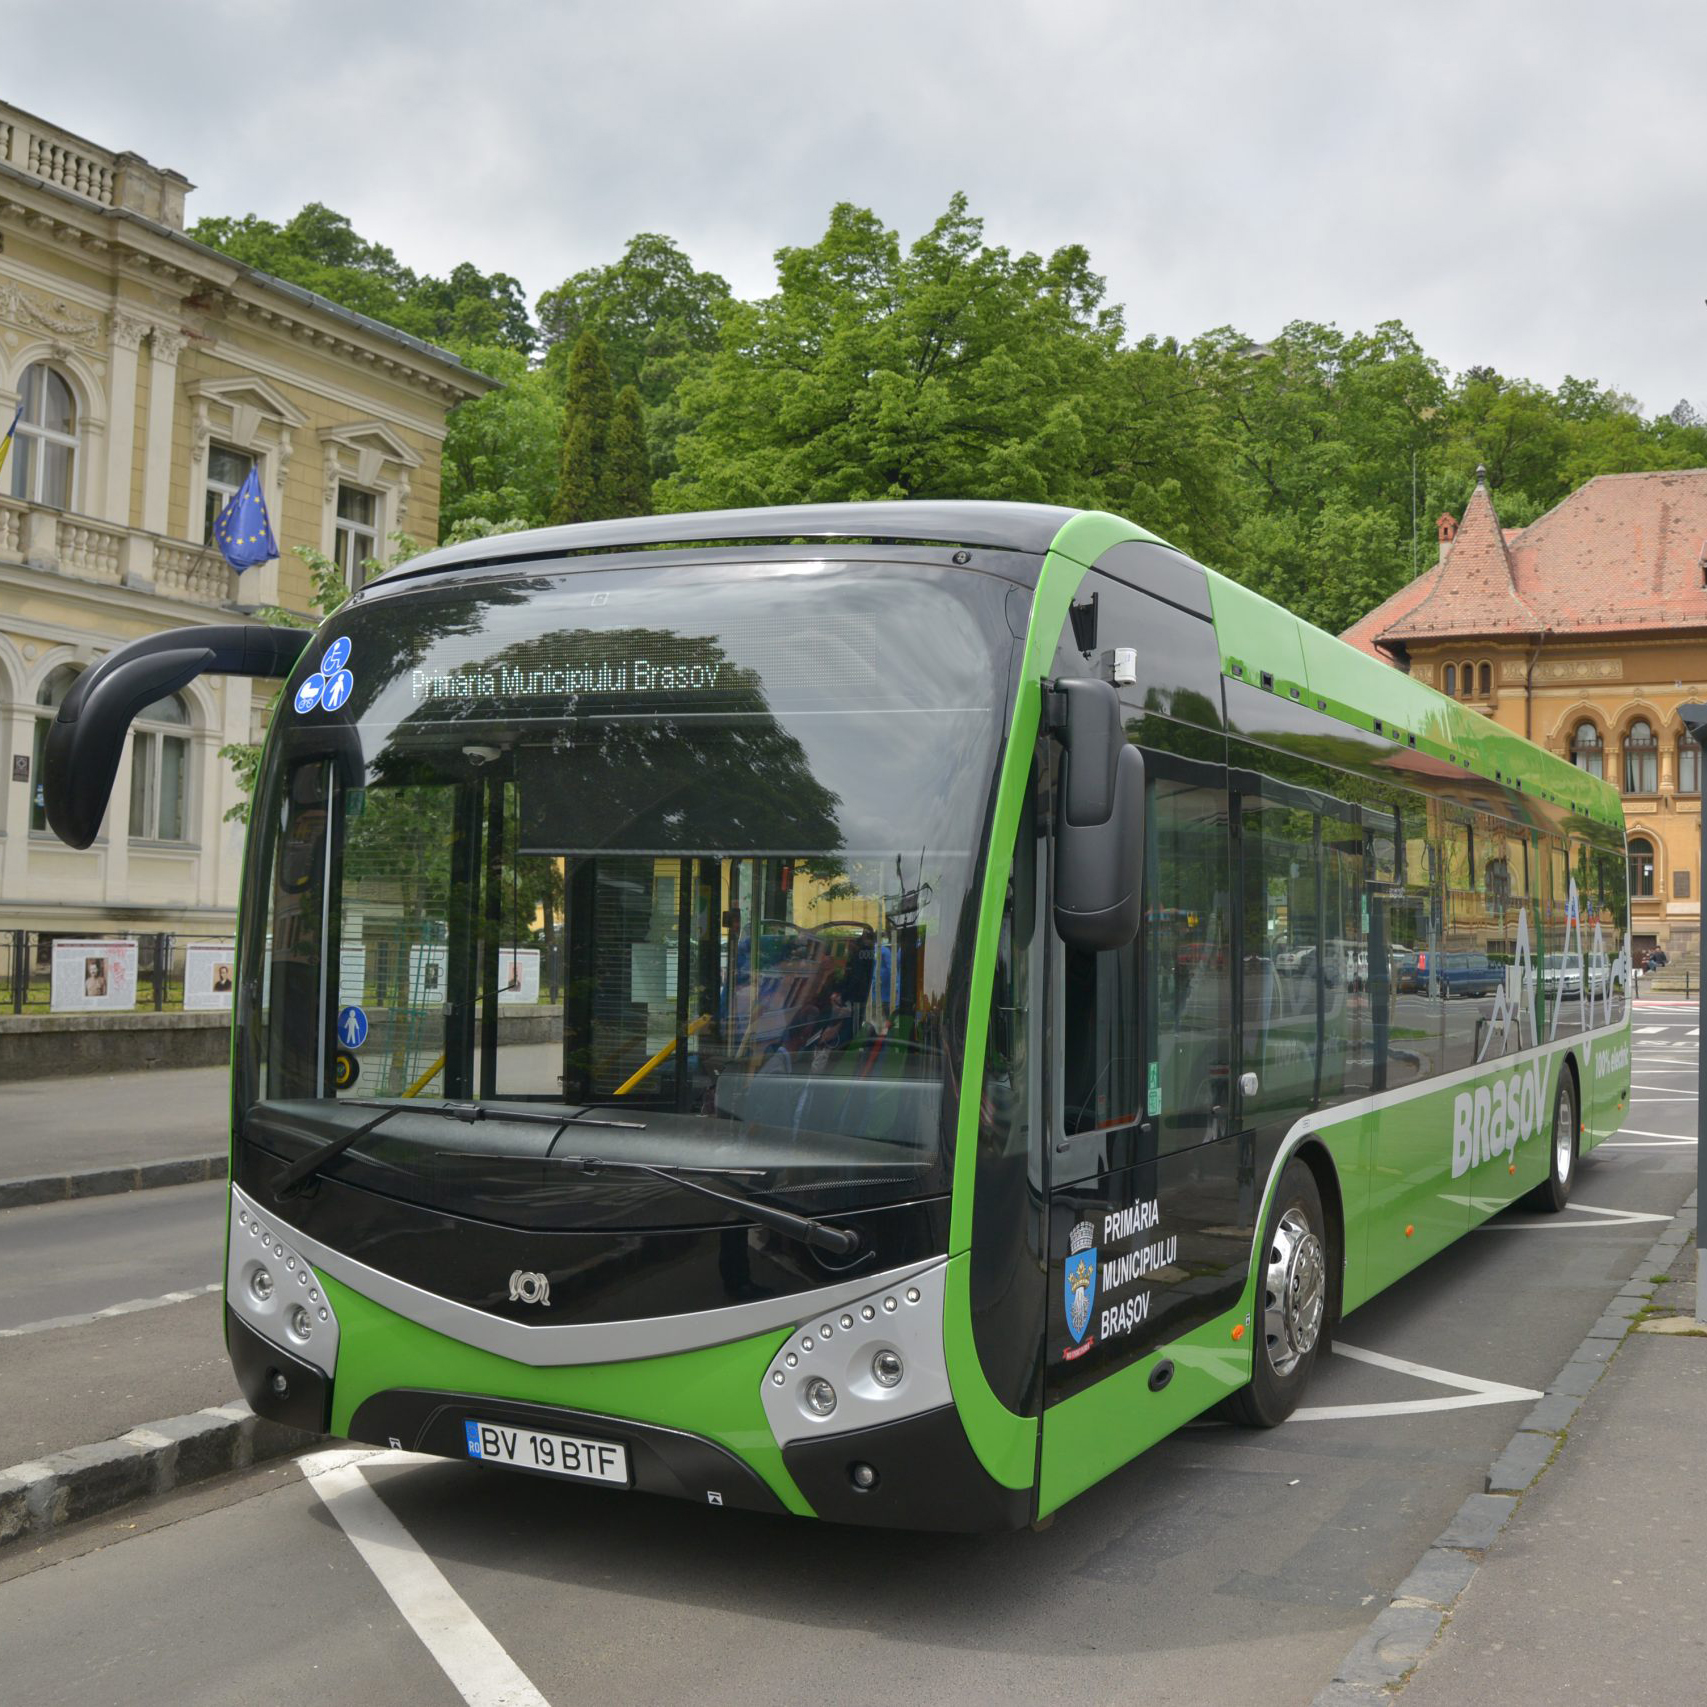 Increasing share of ecological public transport by putting into circulation electric / hybrid electric buses, CNG-powered buses and trolleybuses, vehicles powered by ecological/alternative fuel or any other ecological propulsion sources